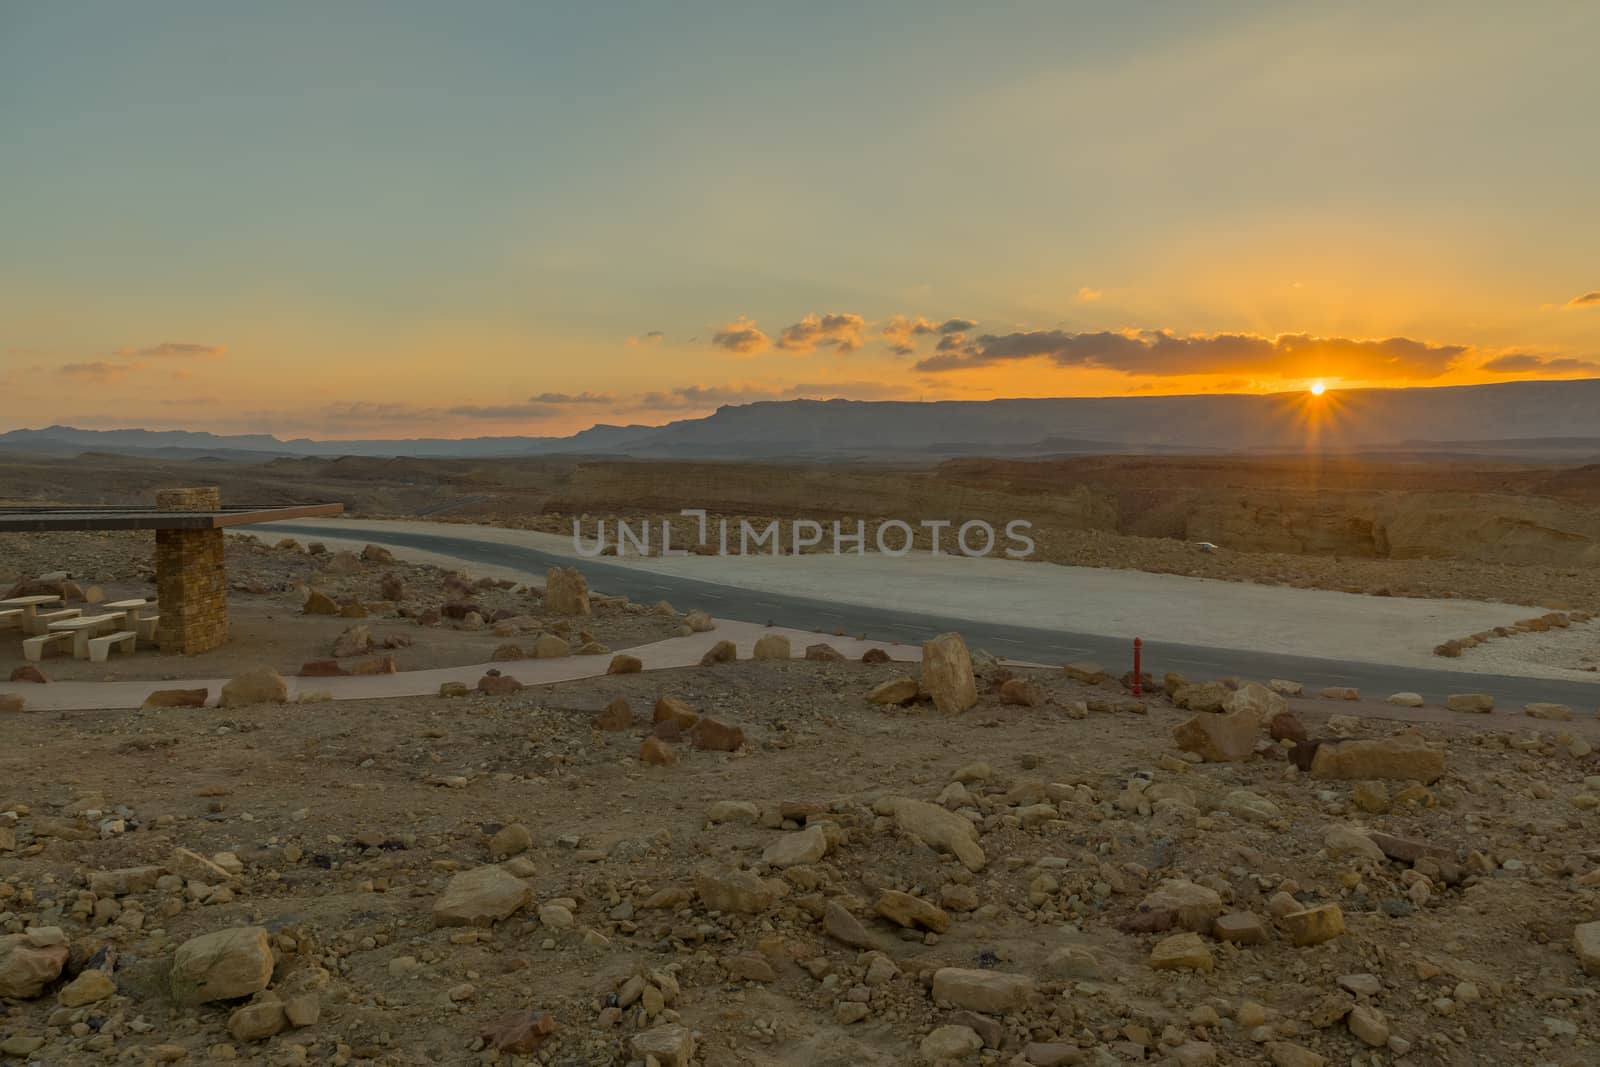 Sunset view from Makhtesh (crater) Ramon, the Negev Desert, Southern Israel